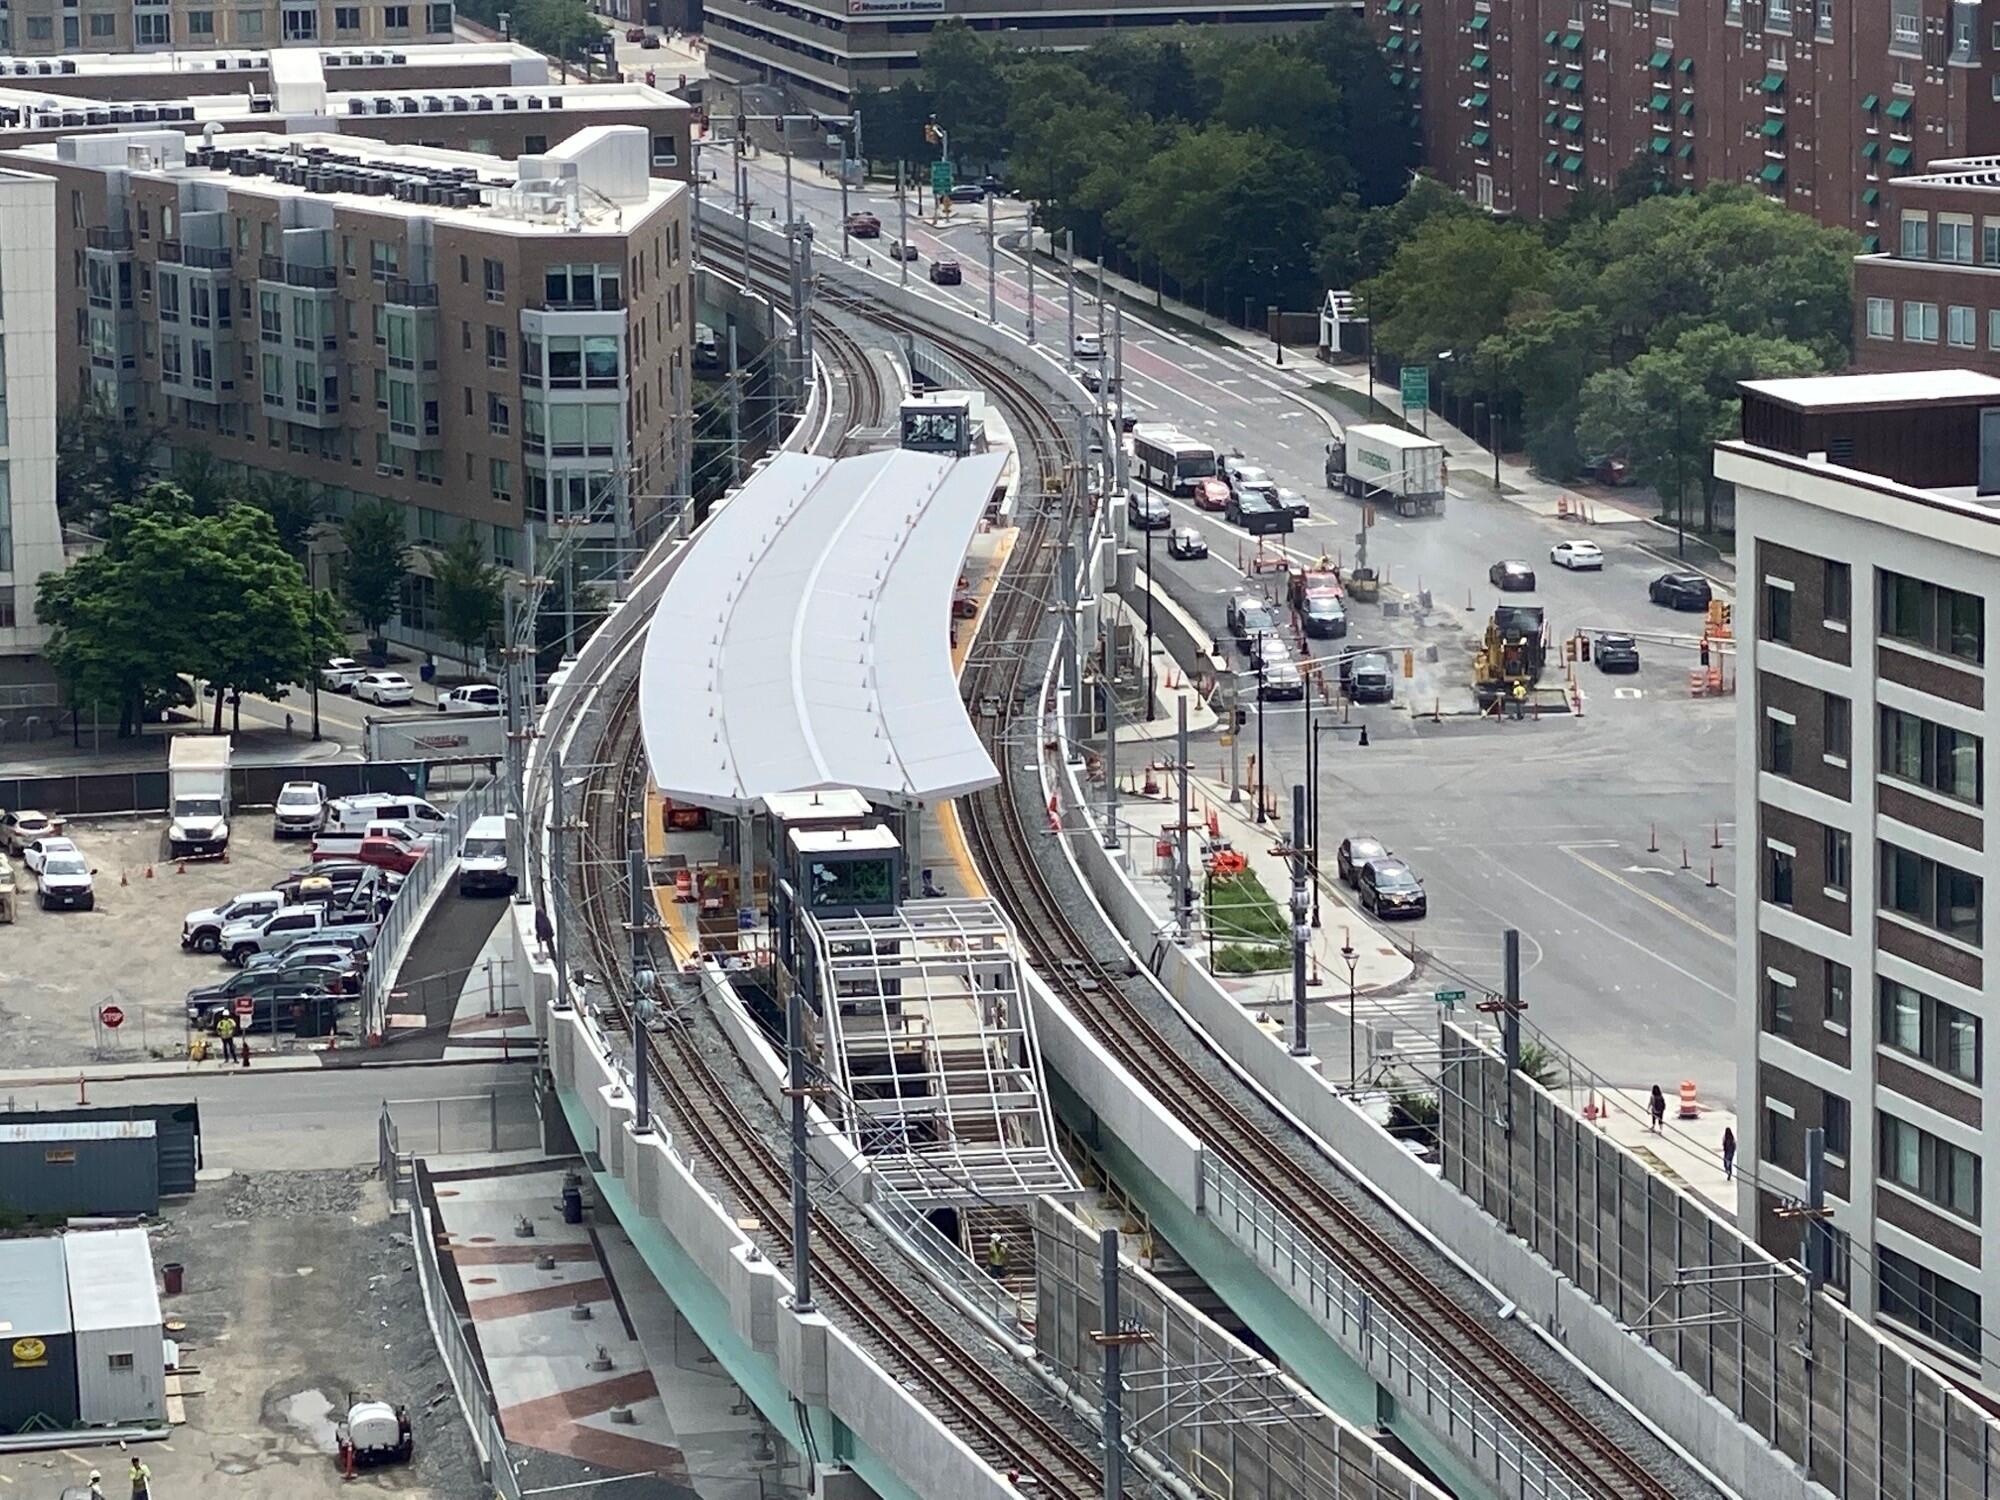 An arial view of the new Lechmere Station, facing South.